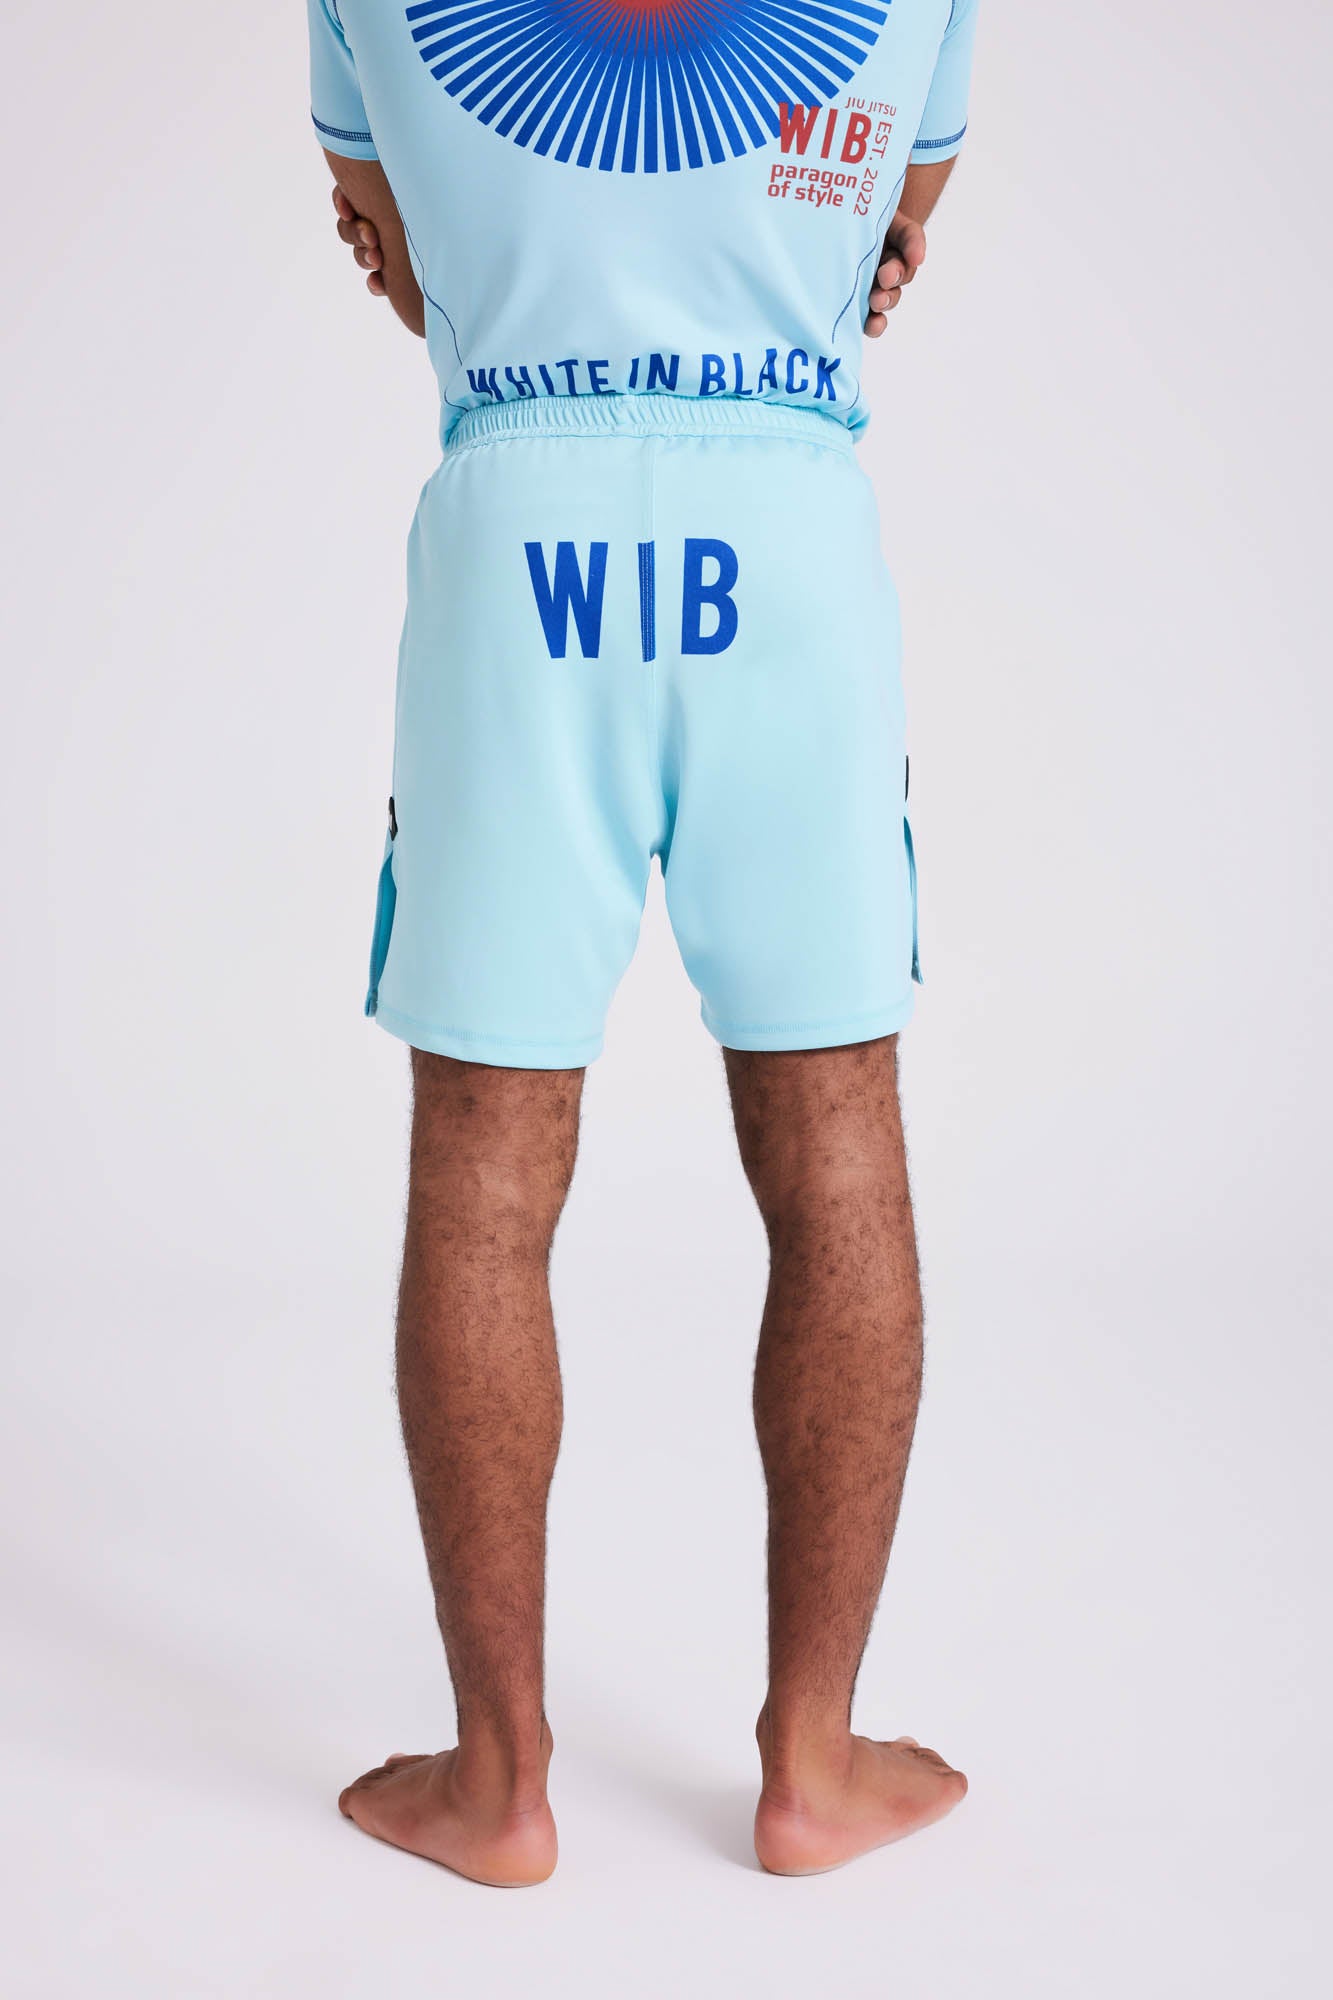 COLL1: Blue Shorts Black – White in